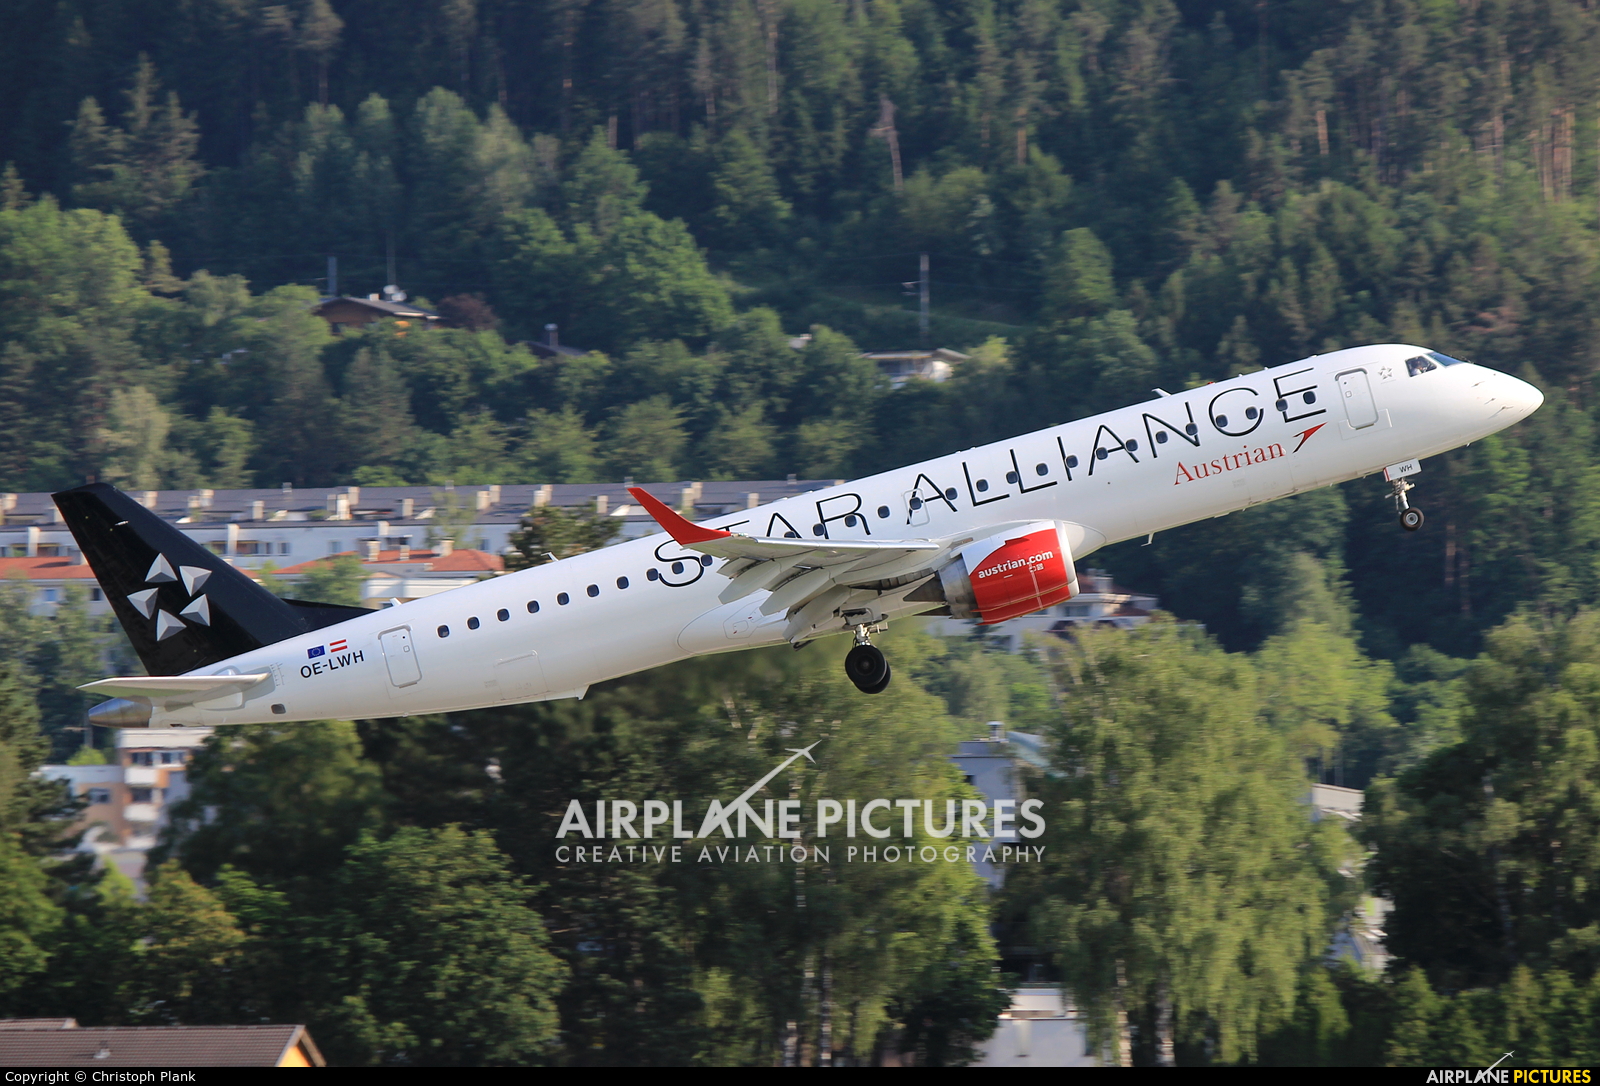 Austrian Airlines/Arrows/Tyrolean OE-LWH aircraft at Innsbruck